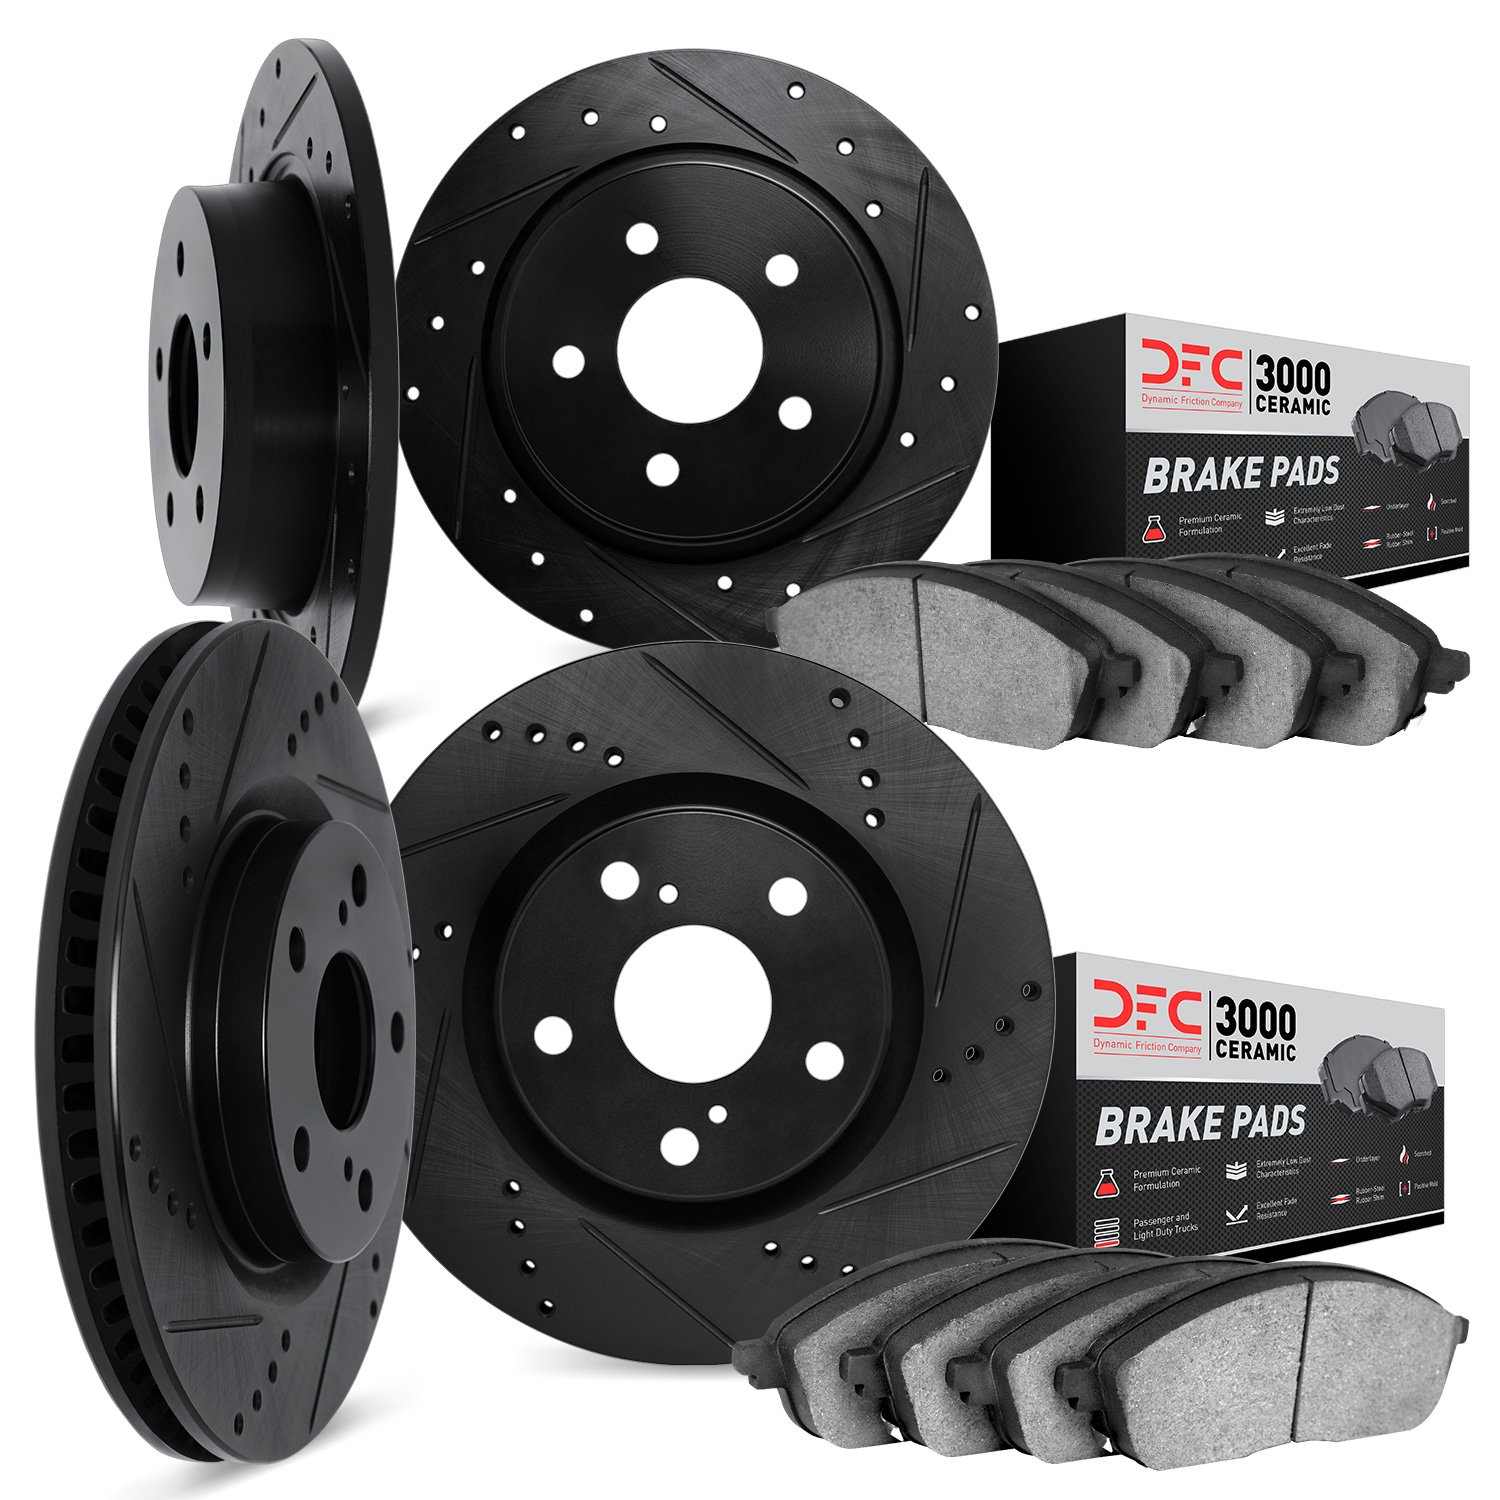 8304-31028 Drilled/Slotted Brake Rotors with 3000-Series Ceramic Brake Pads Kit [Black], 1996-2002 BMW, Position: Front and Rear